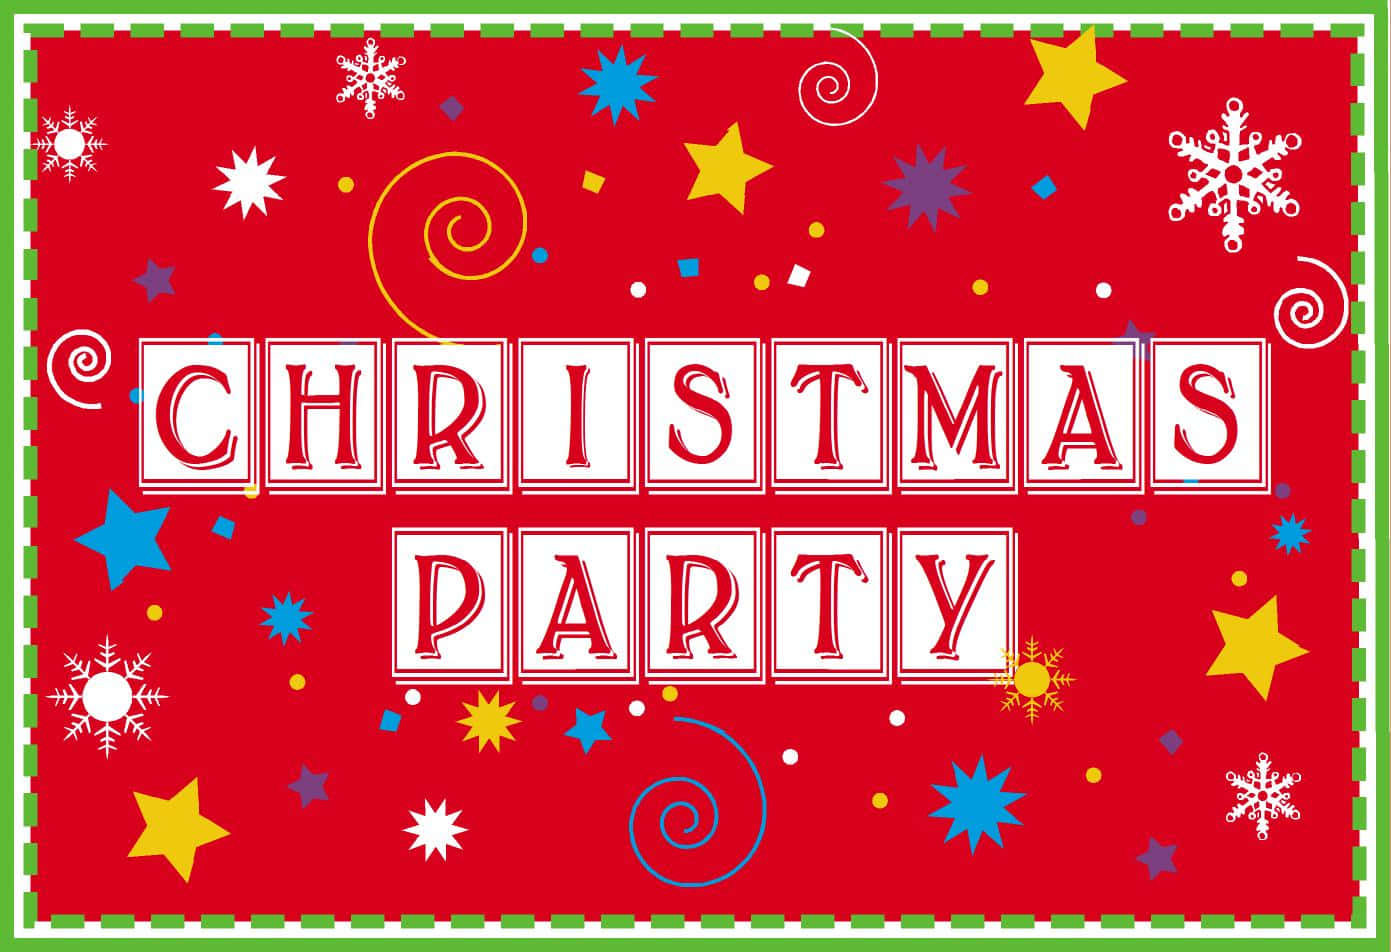 Come join the fun at our annual Christmas Party!